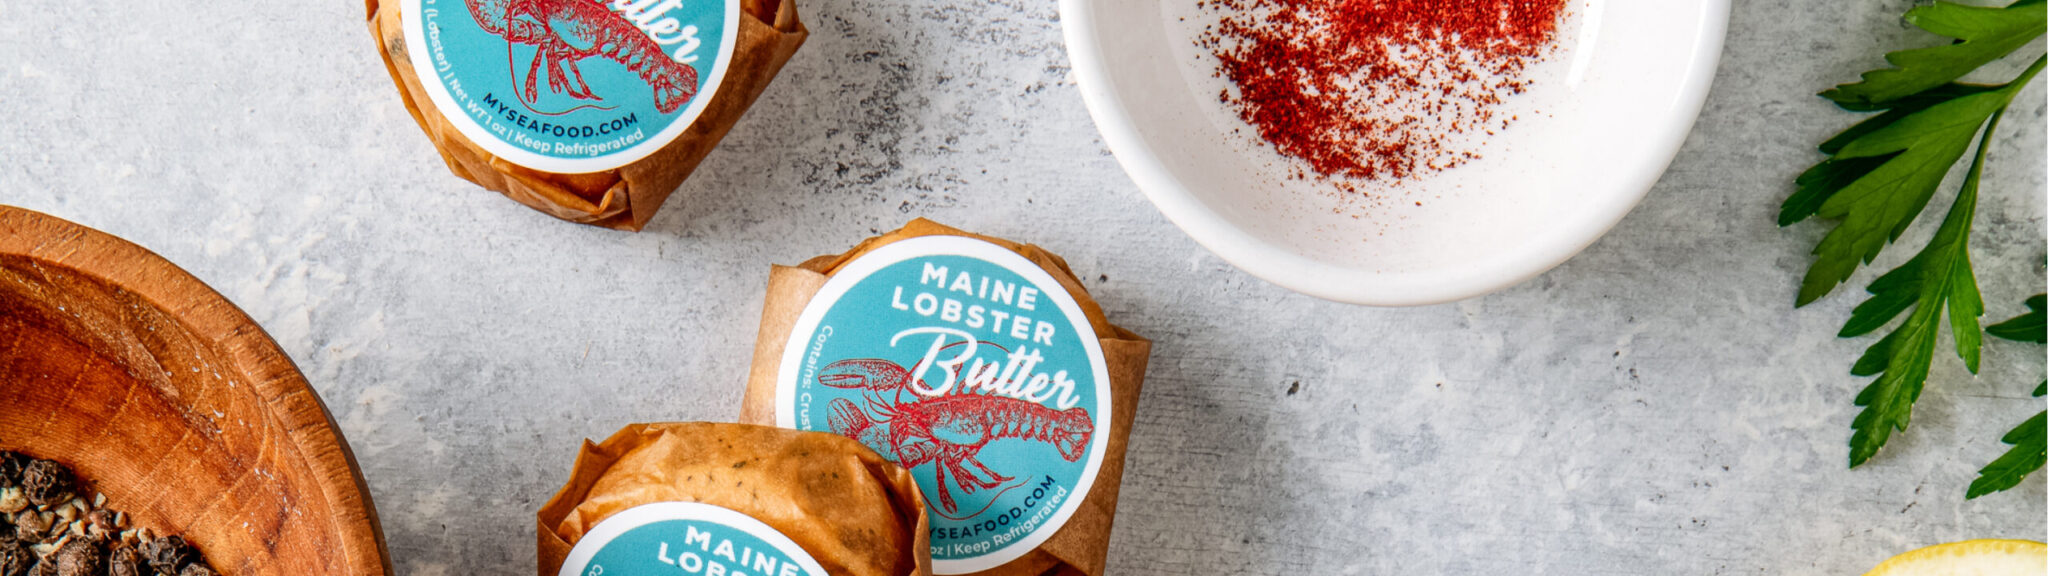 Maine Lobster Butter recipe image